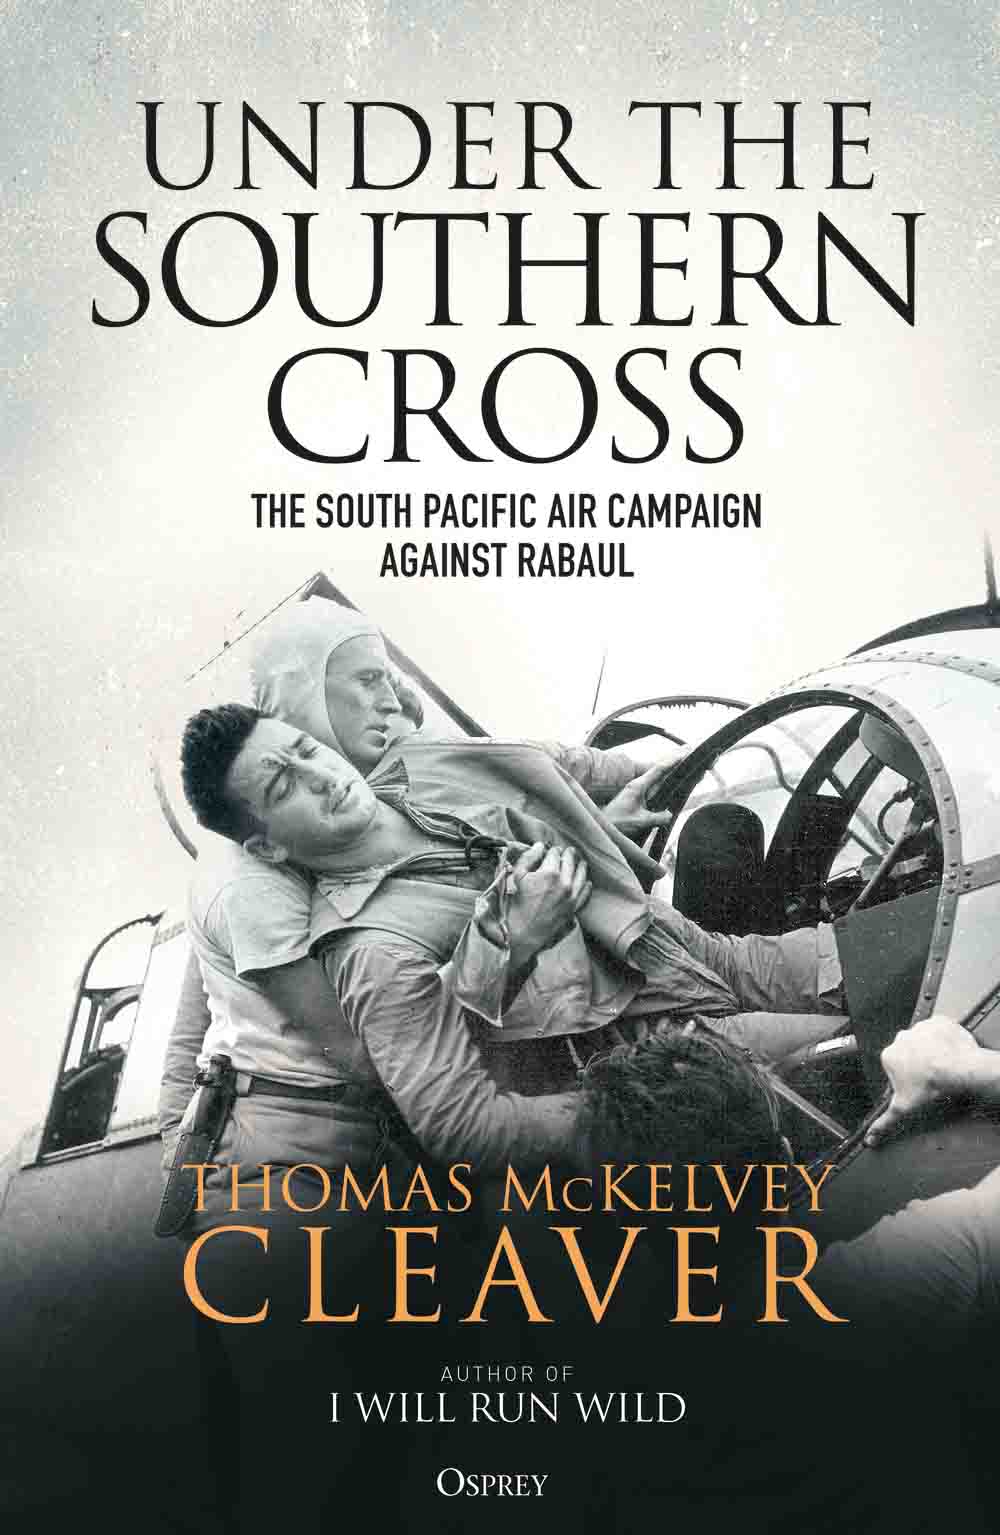 Under the Southern Cross book jacket